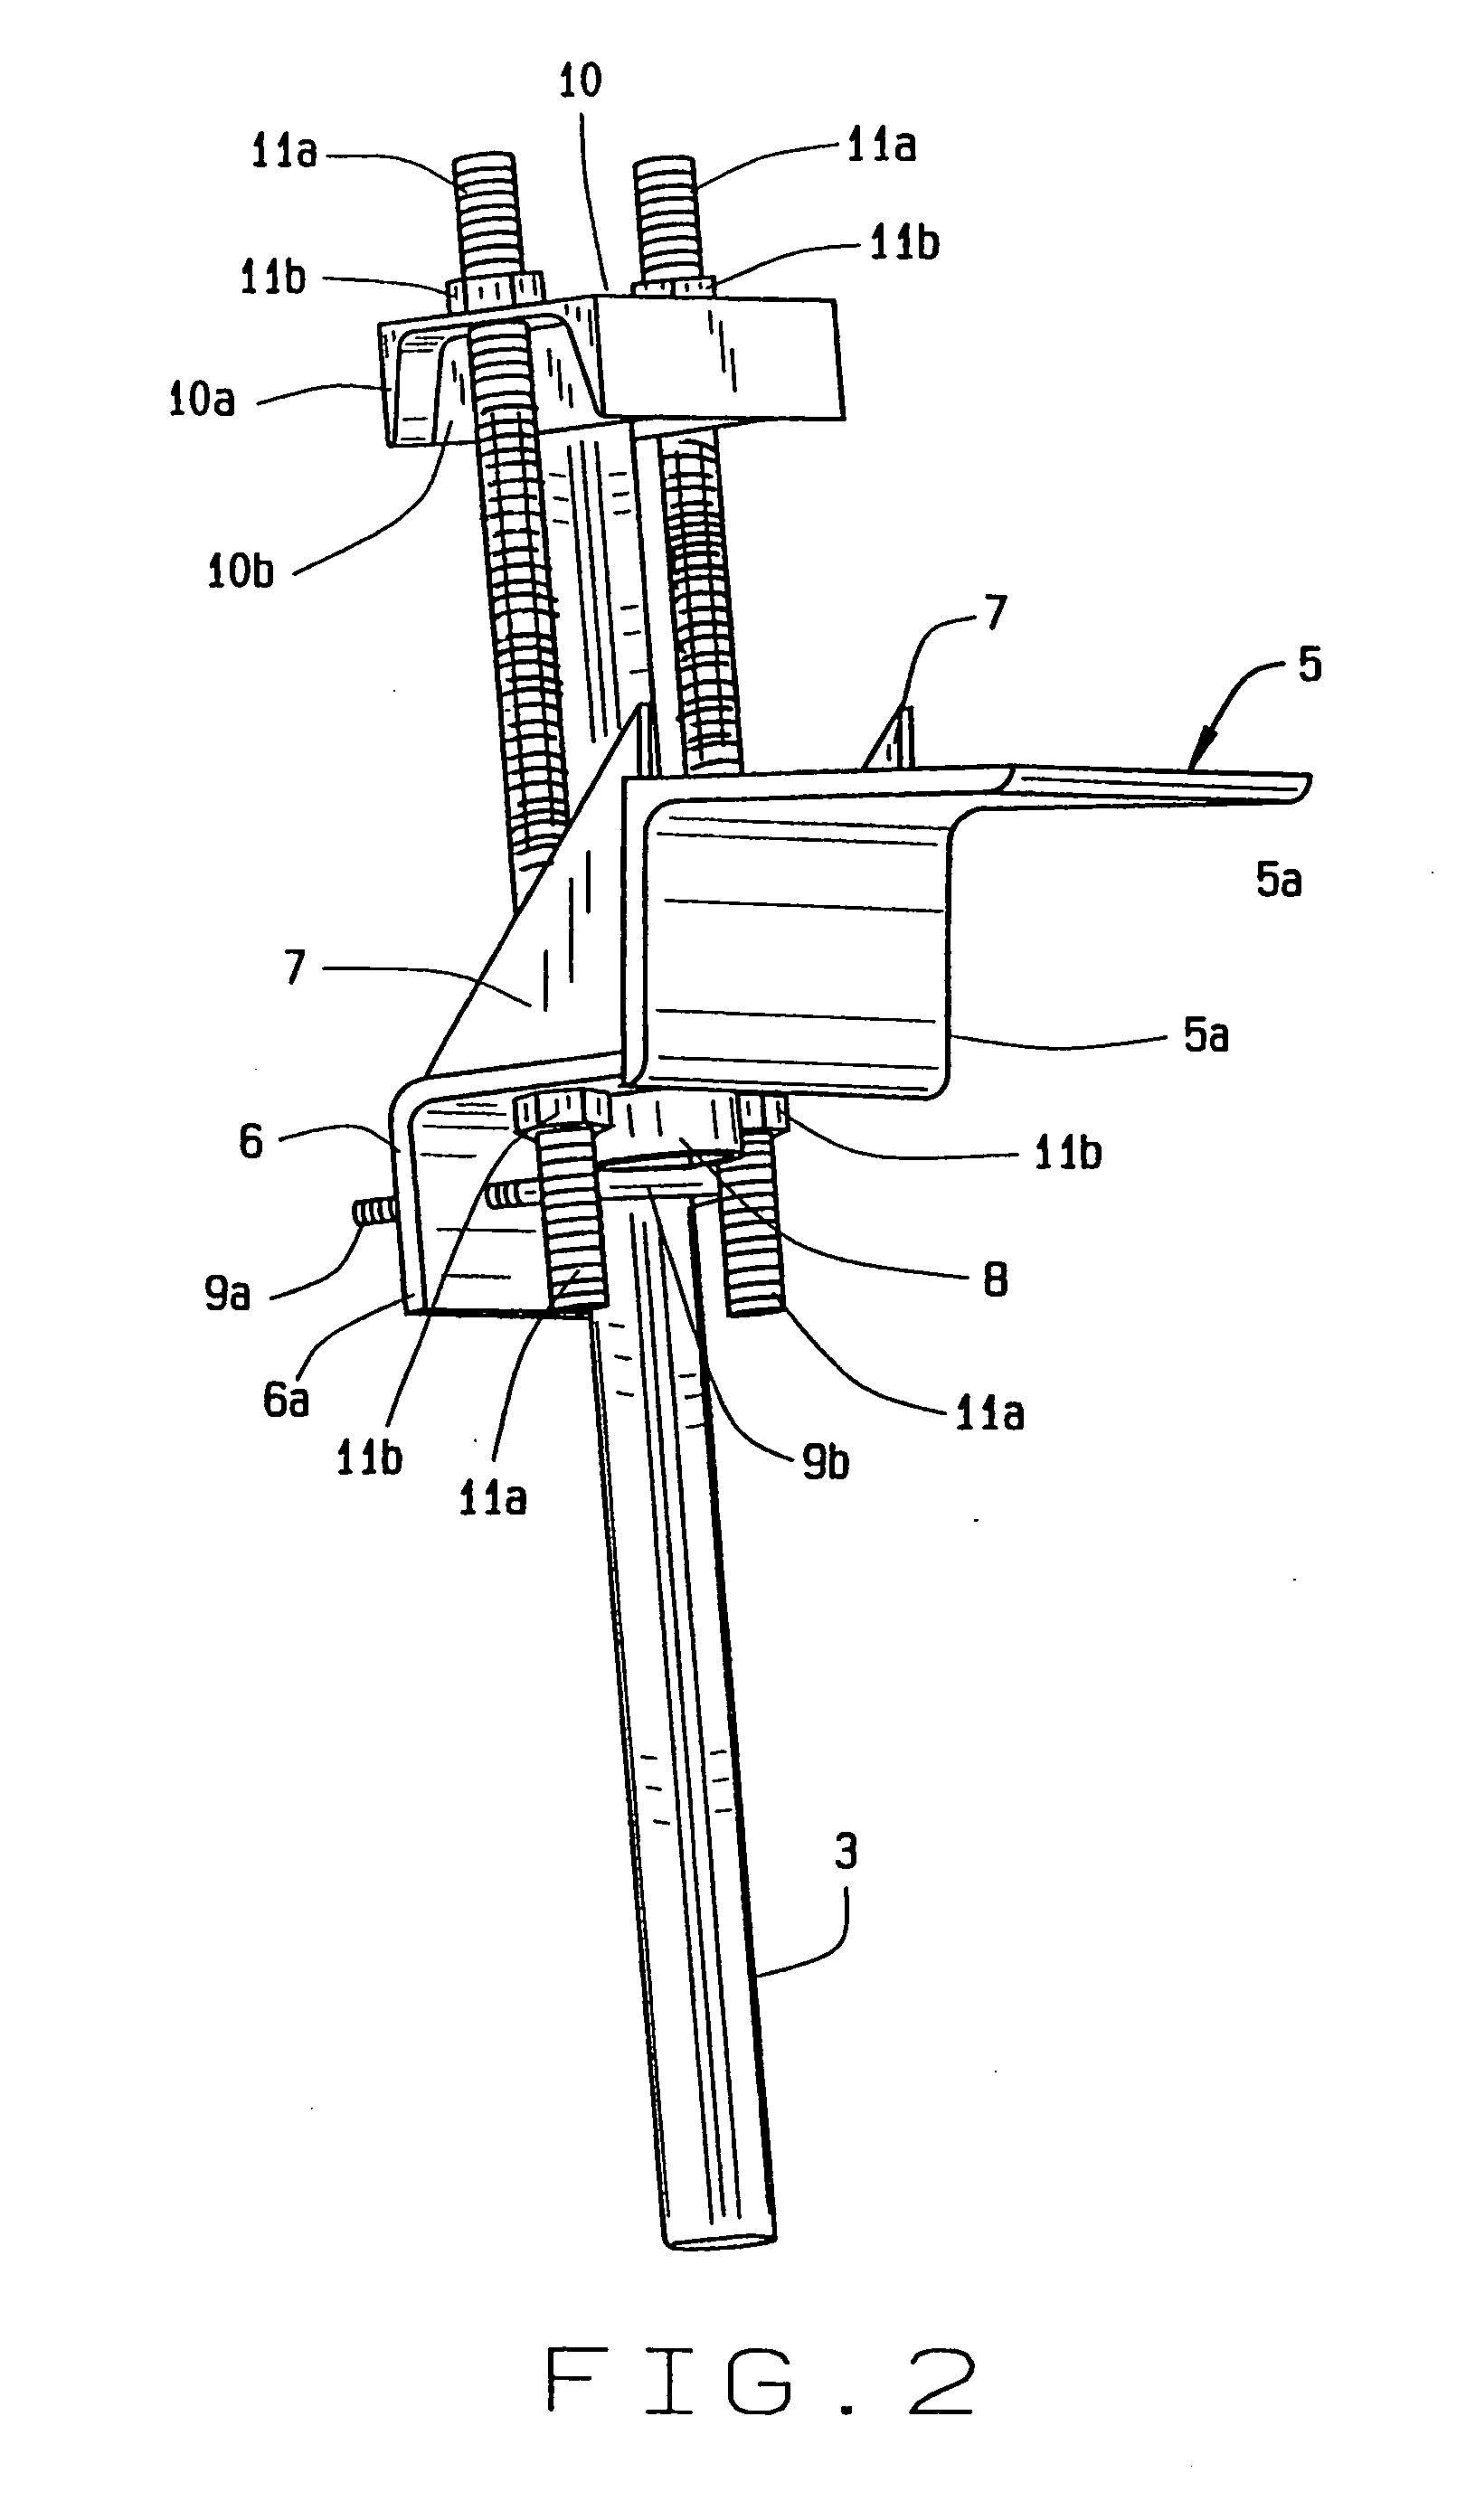 Bracket assembly for lifting and supporting a lightweight foundation